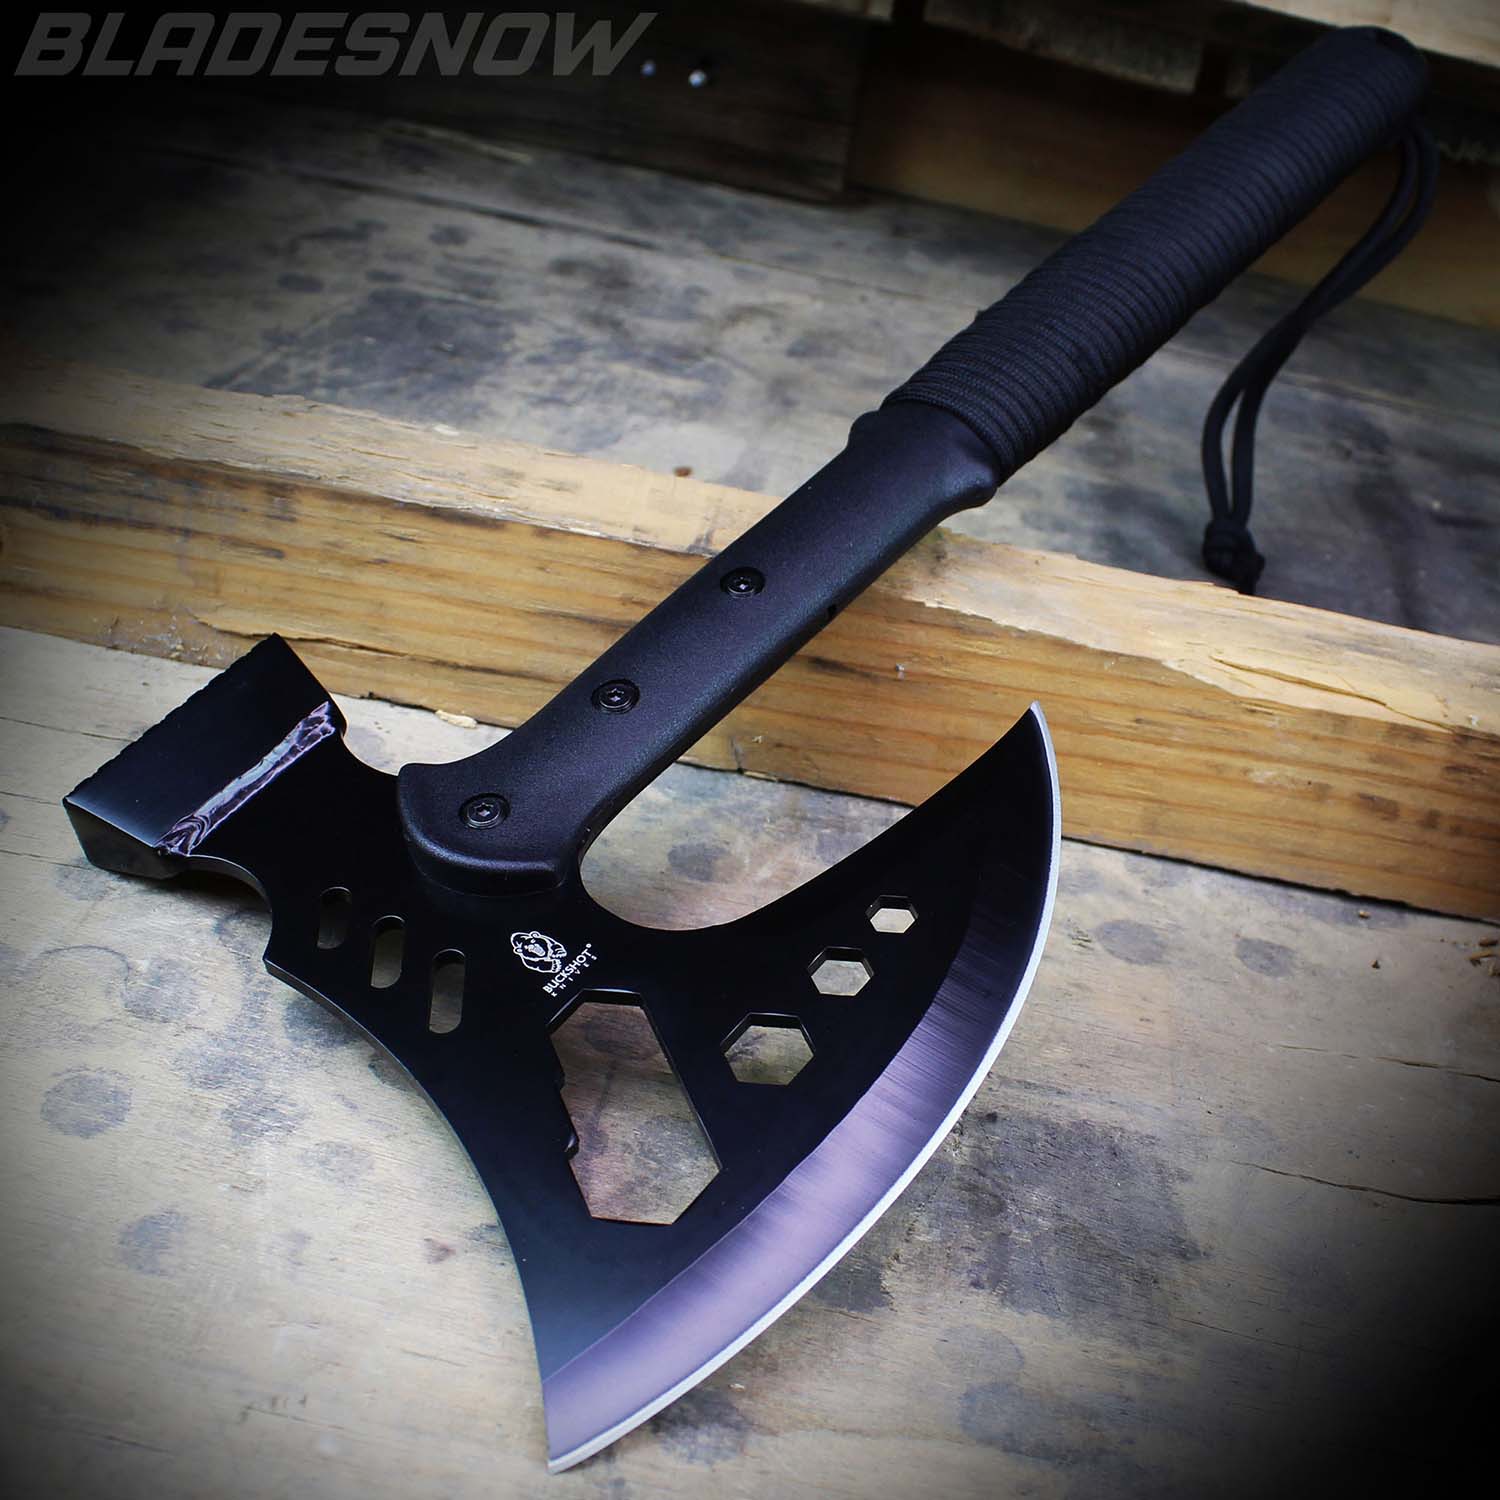 View All Products - Blades Now & | Swords 2 Knives